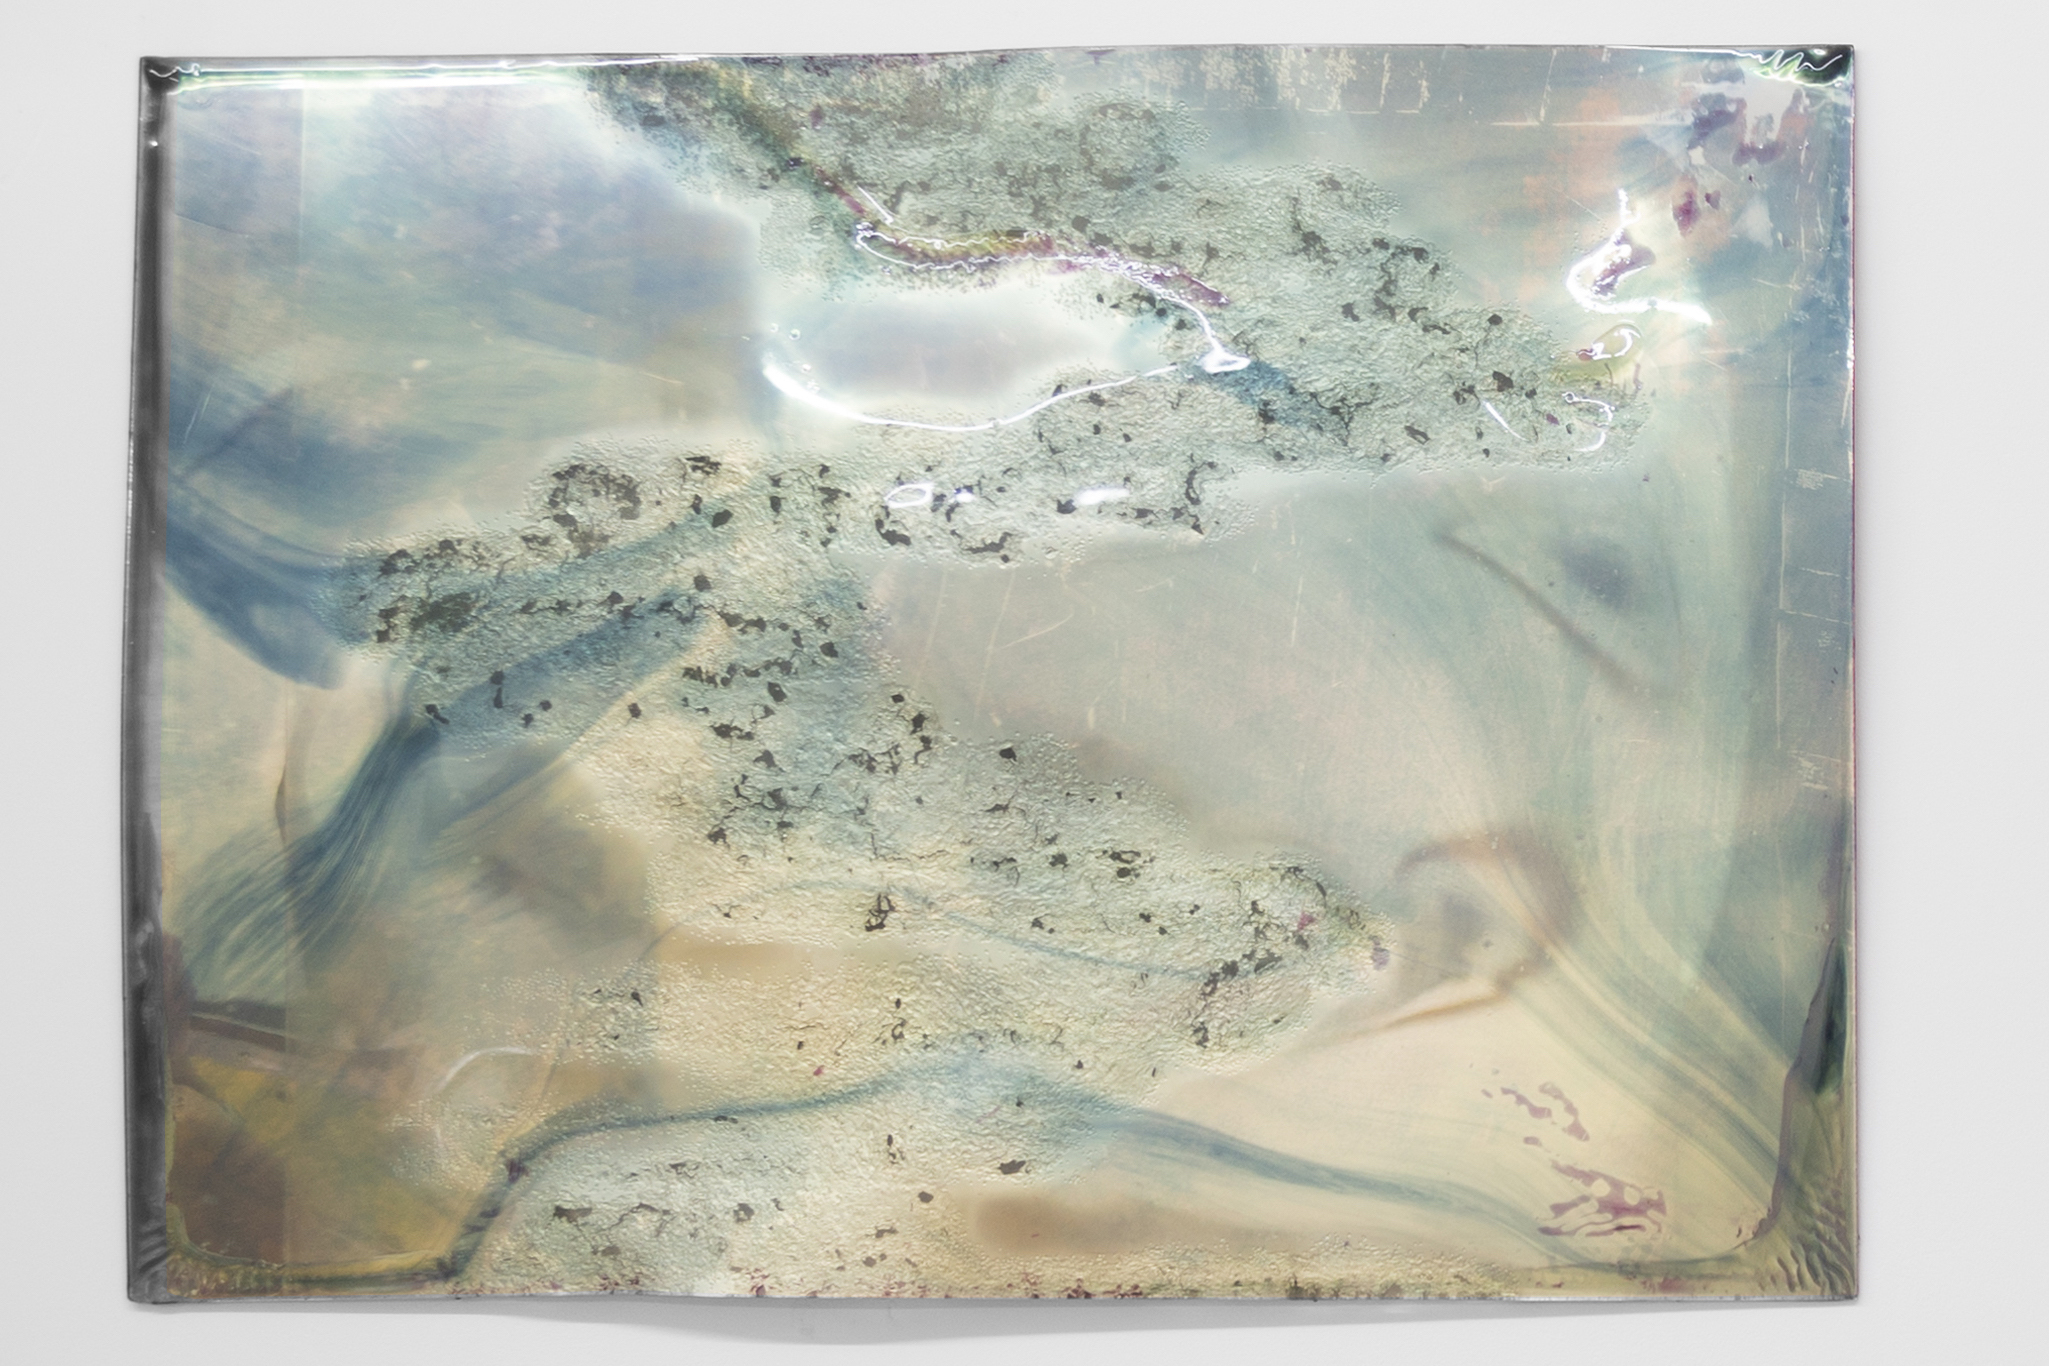 Untitled, Série L'Air de Rien, 2016, Colored varnish on plexiglass thermo-formed mirror, 50 x 70 cm